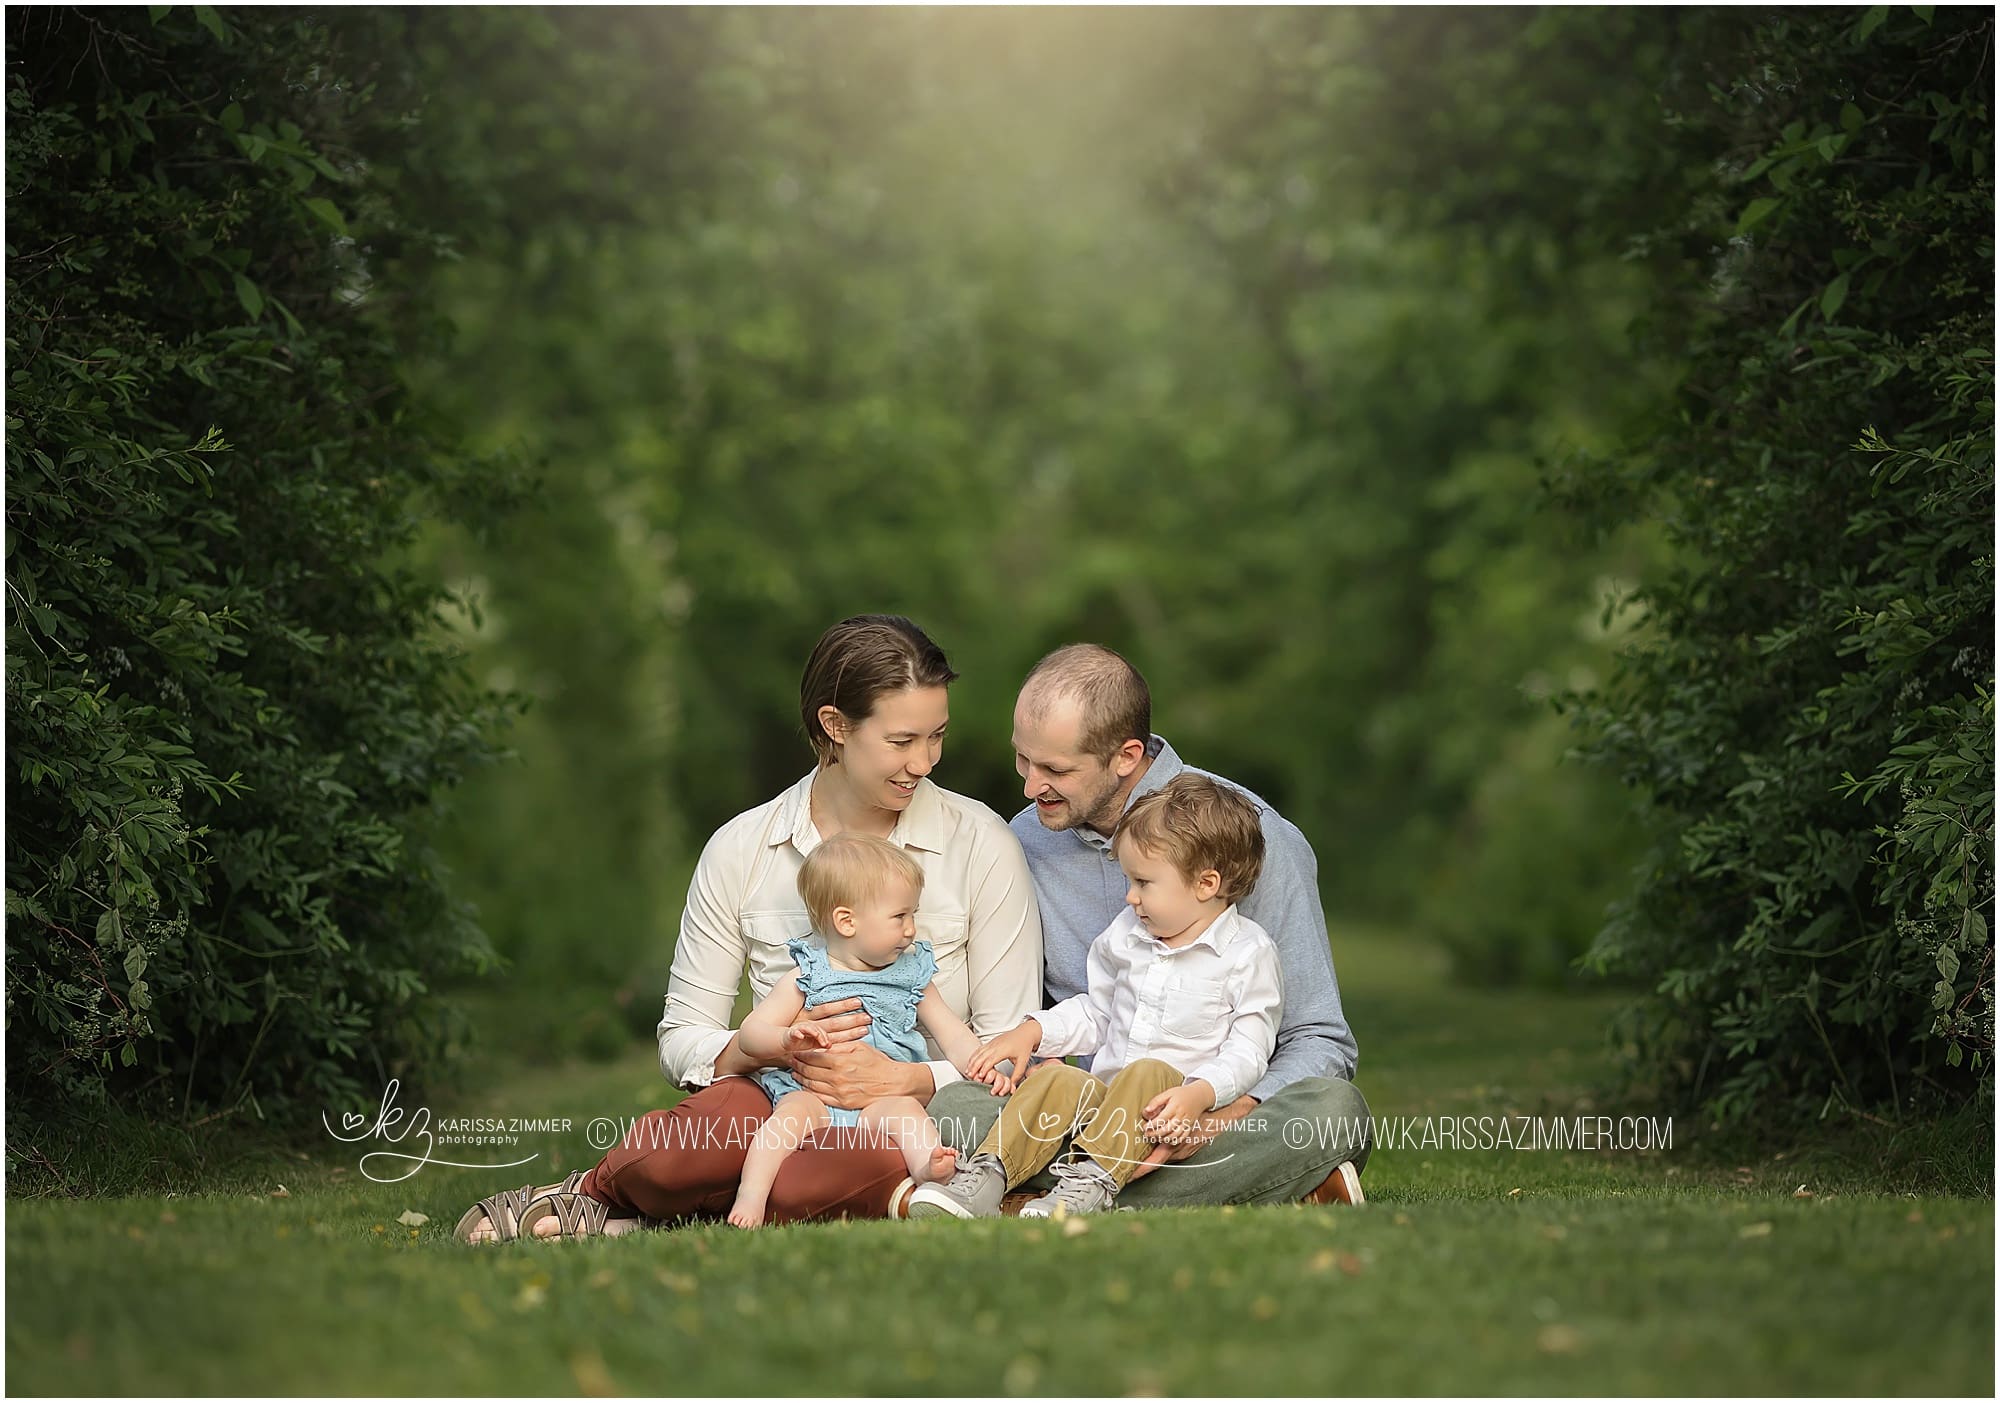 Family Photography session in Mechanicsburg PA